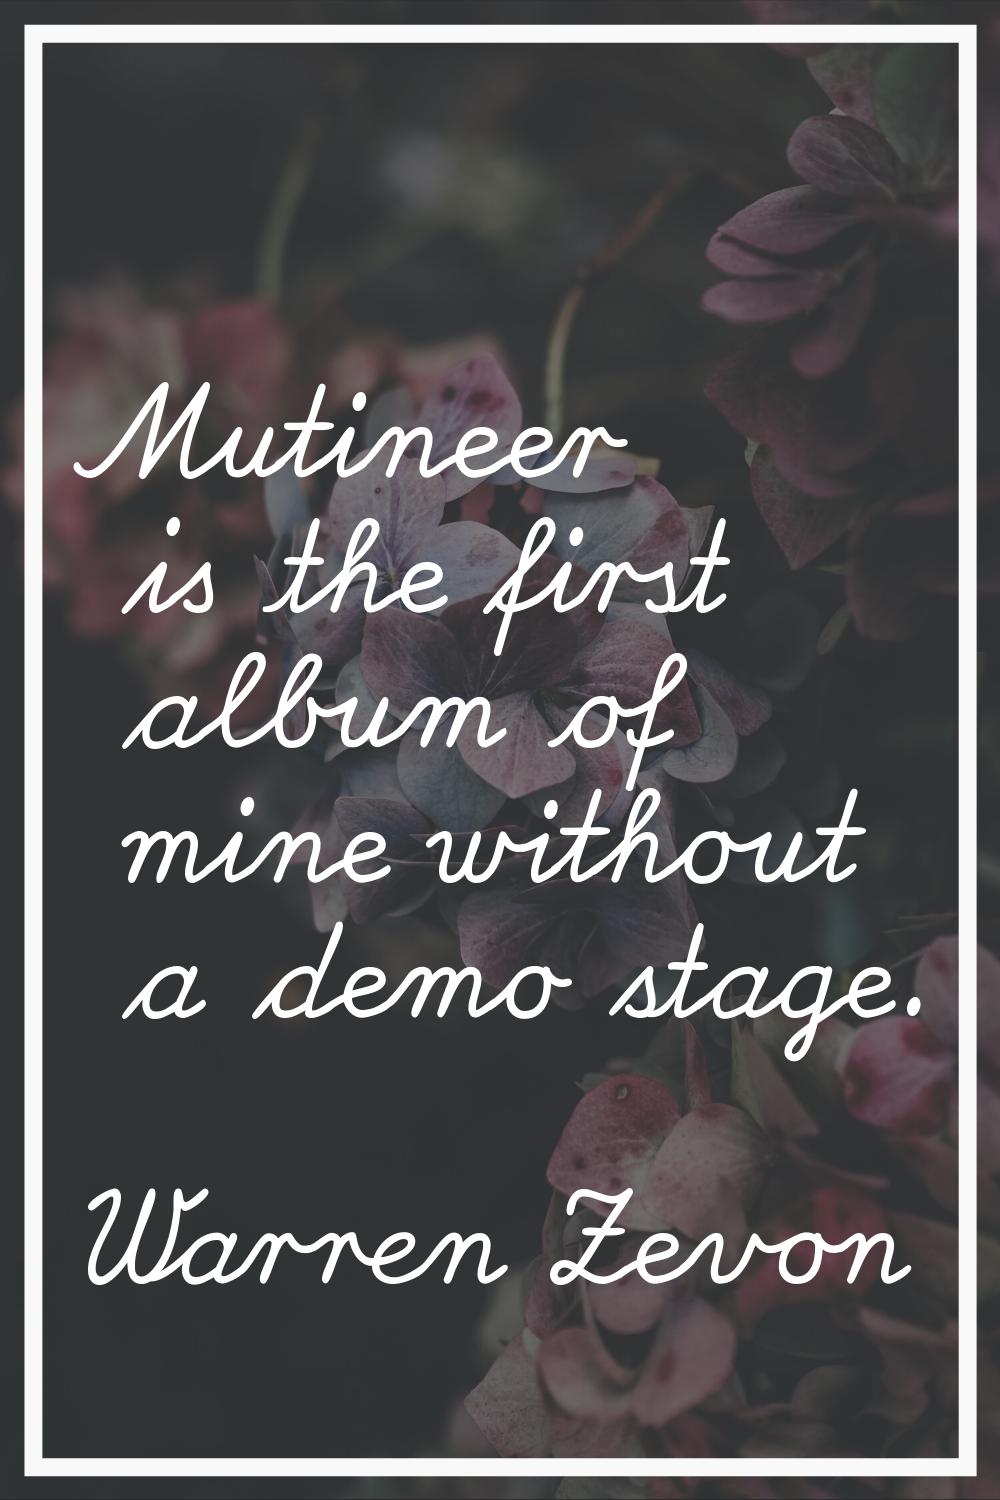 Mutineer is the first album of mine without a demo stage.